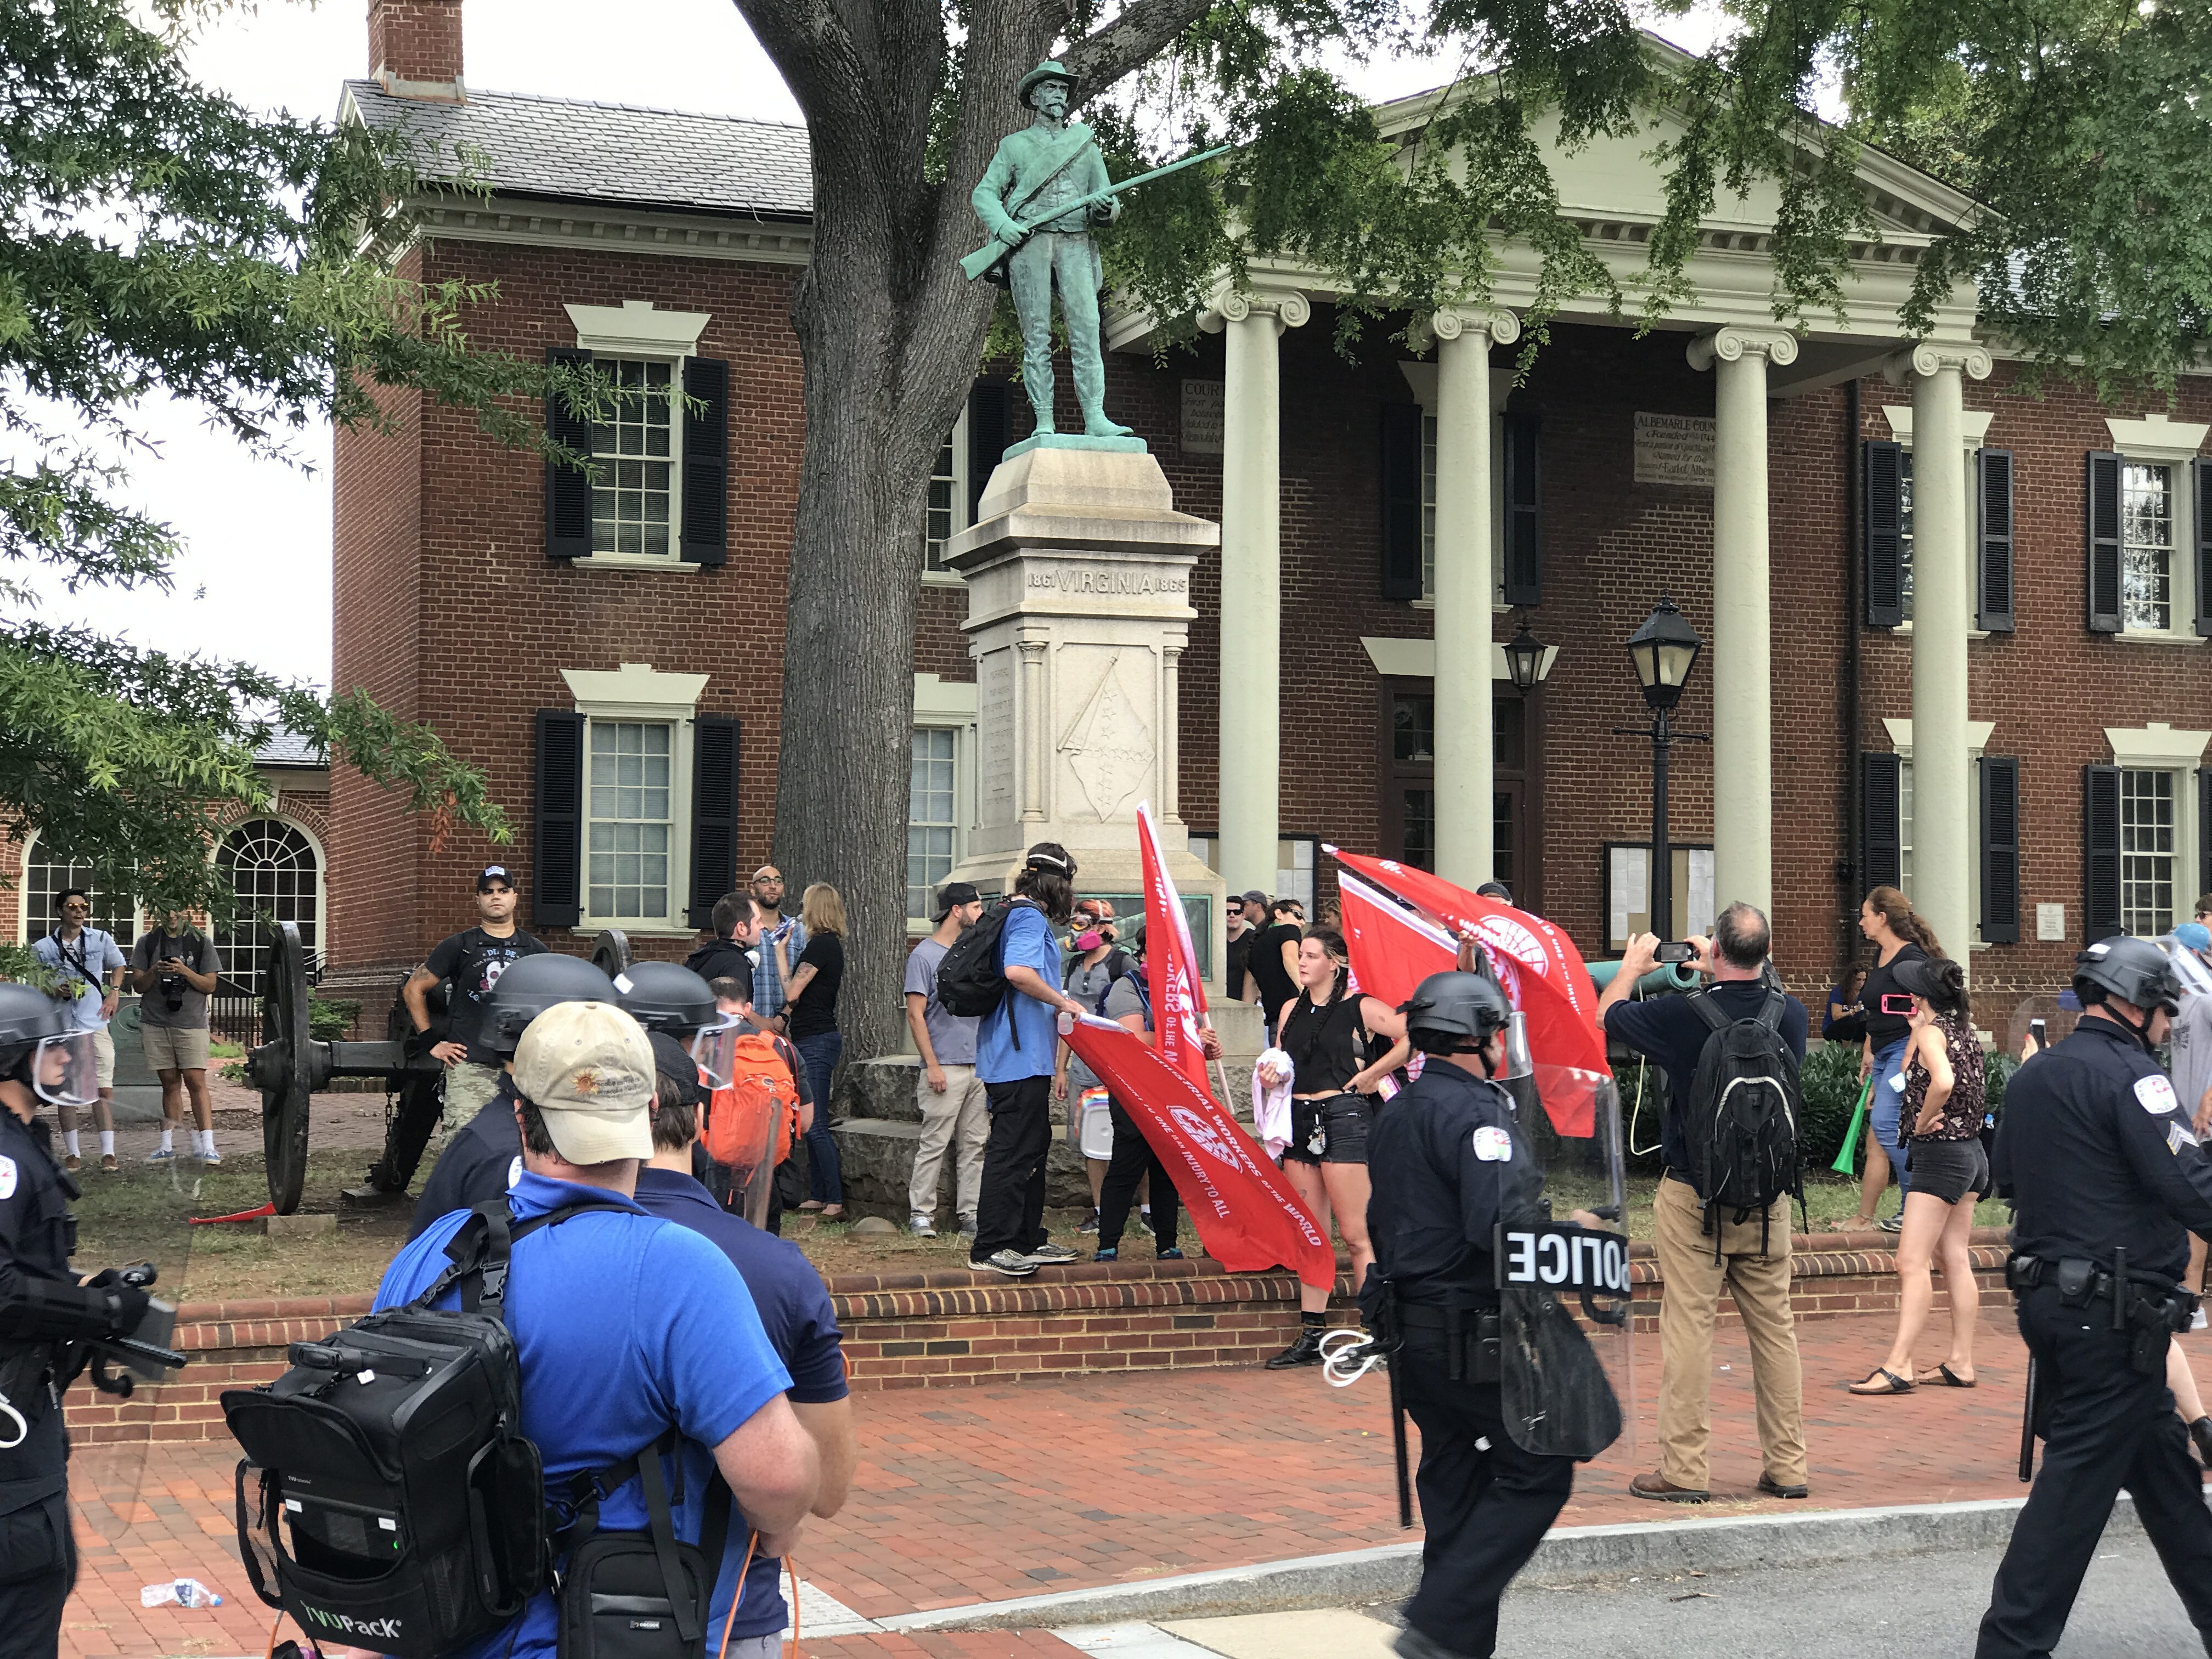 Counter-protesters in Justice Park in Charlottesville, Va. Anthony Crider/Wikimedia Commons.